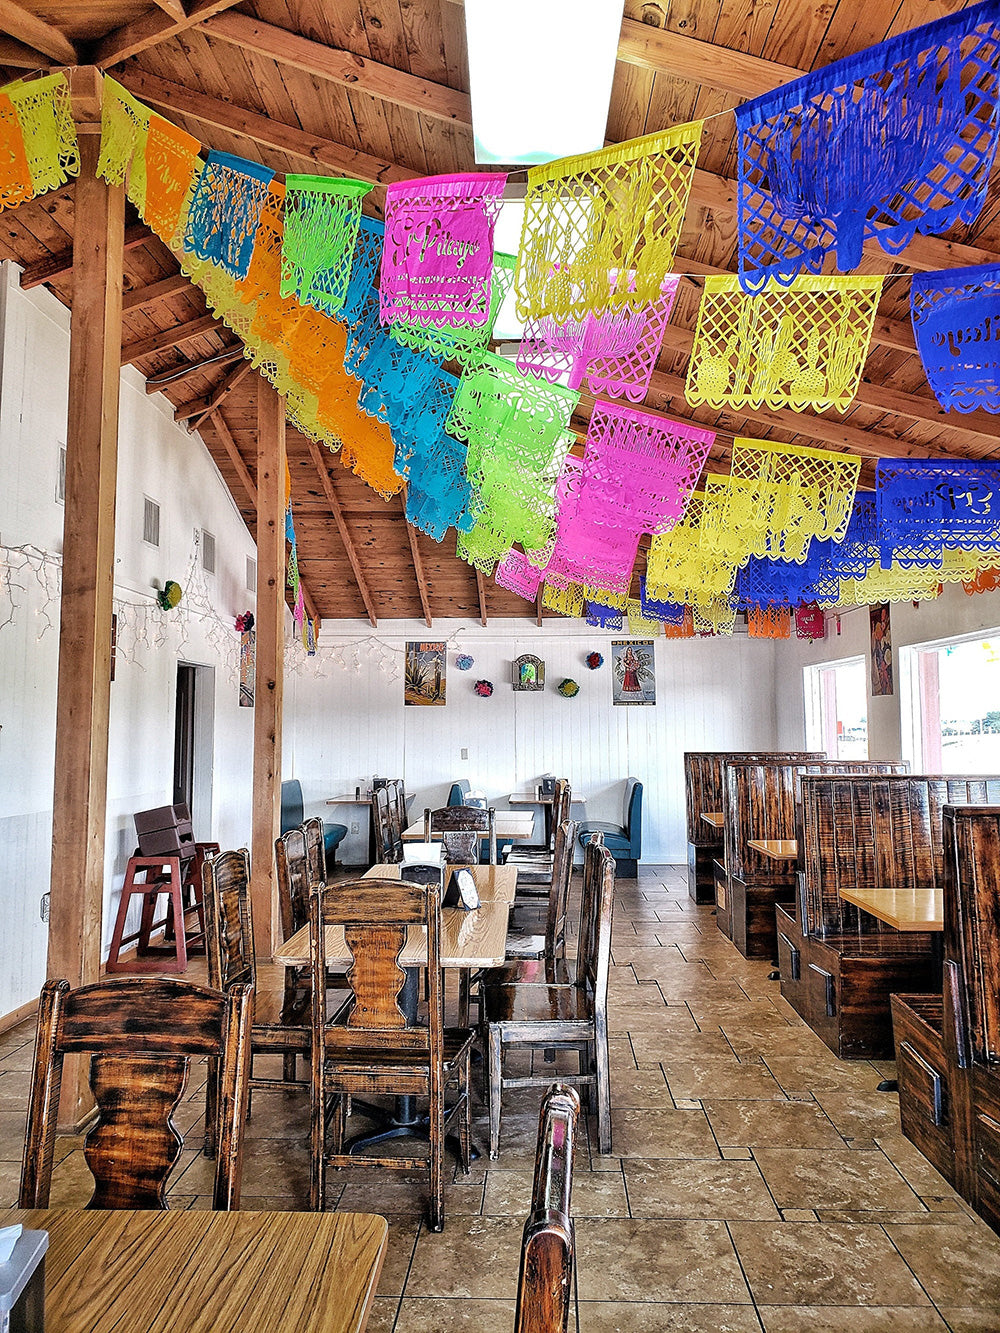 Mexican Restaurant Bunting Decor Custom Made Flags Made With Your Logo in Your Branding Colours - ARTMEXICO